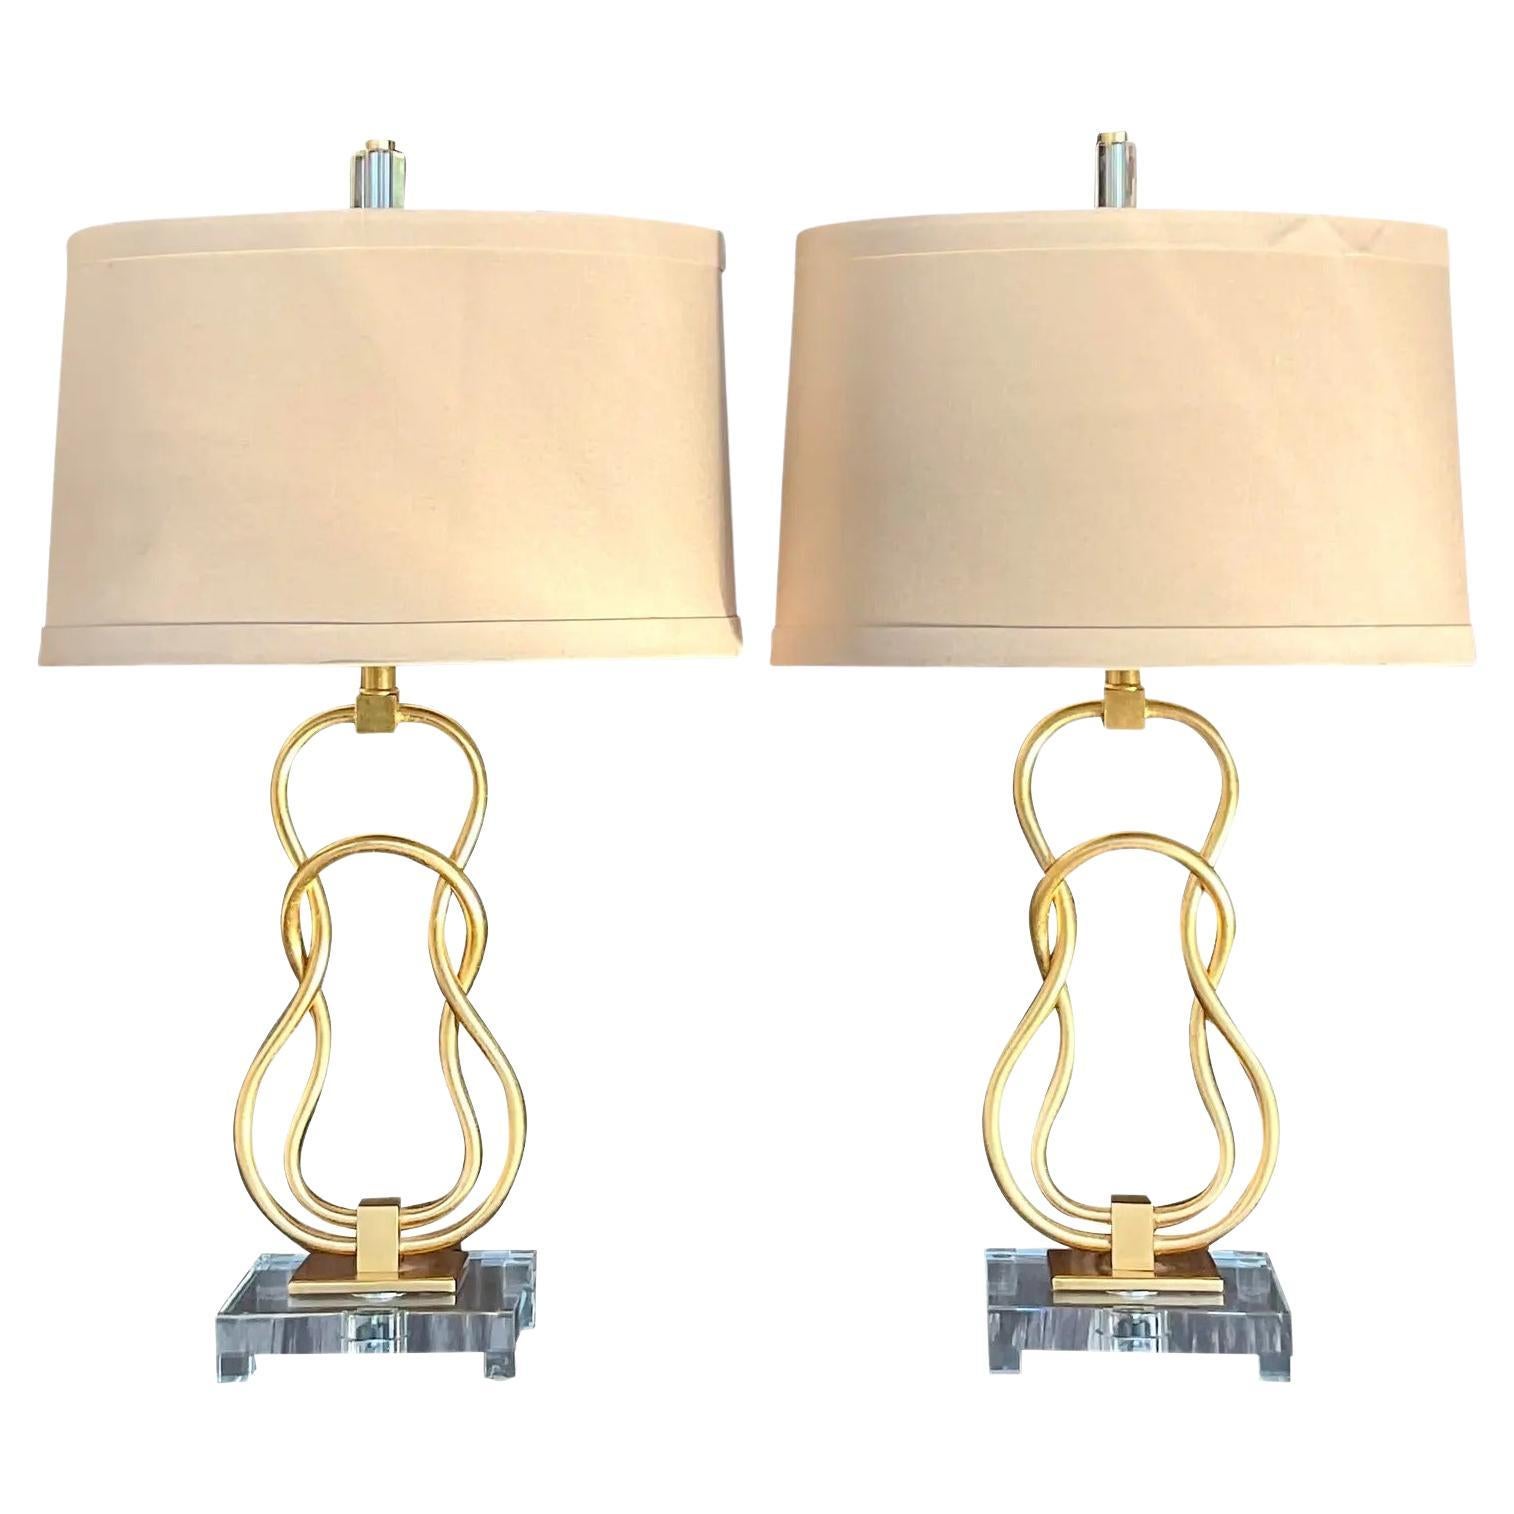 Vintage Contemporary Linked Gilt Rings Lamps - a Pair For Sale